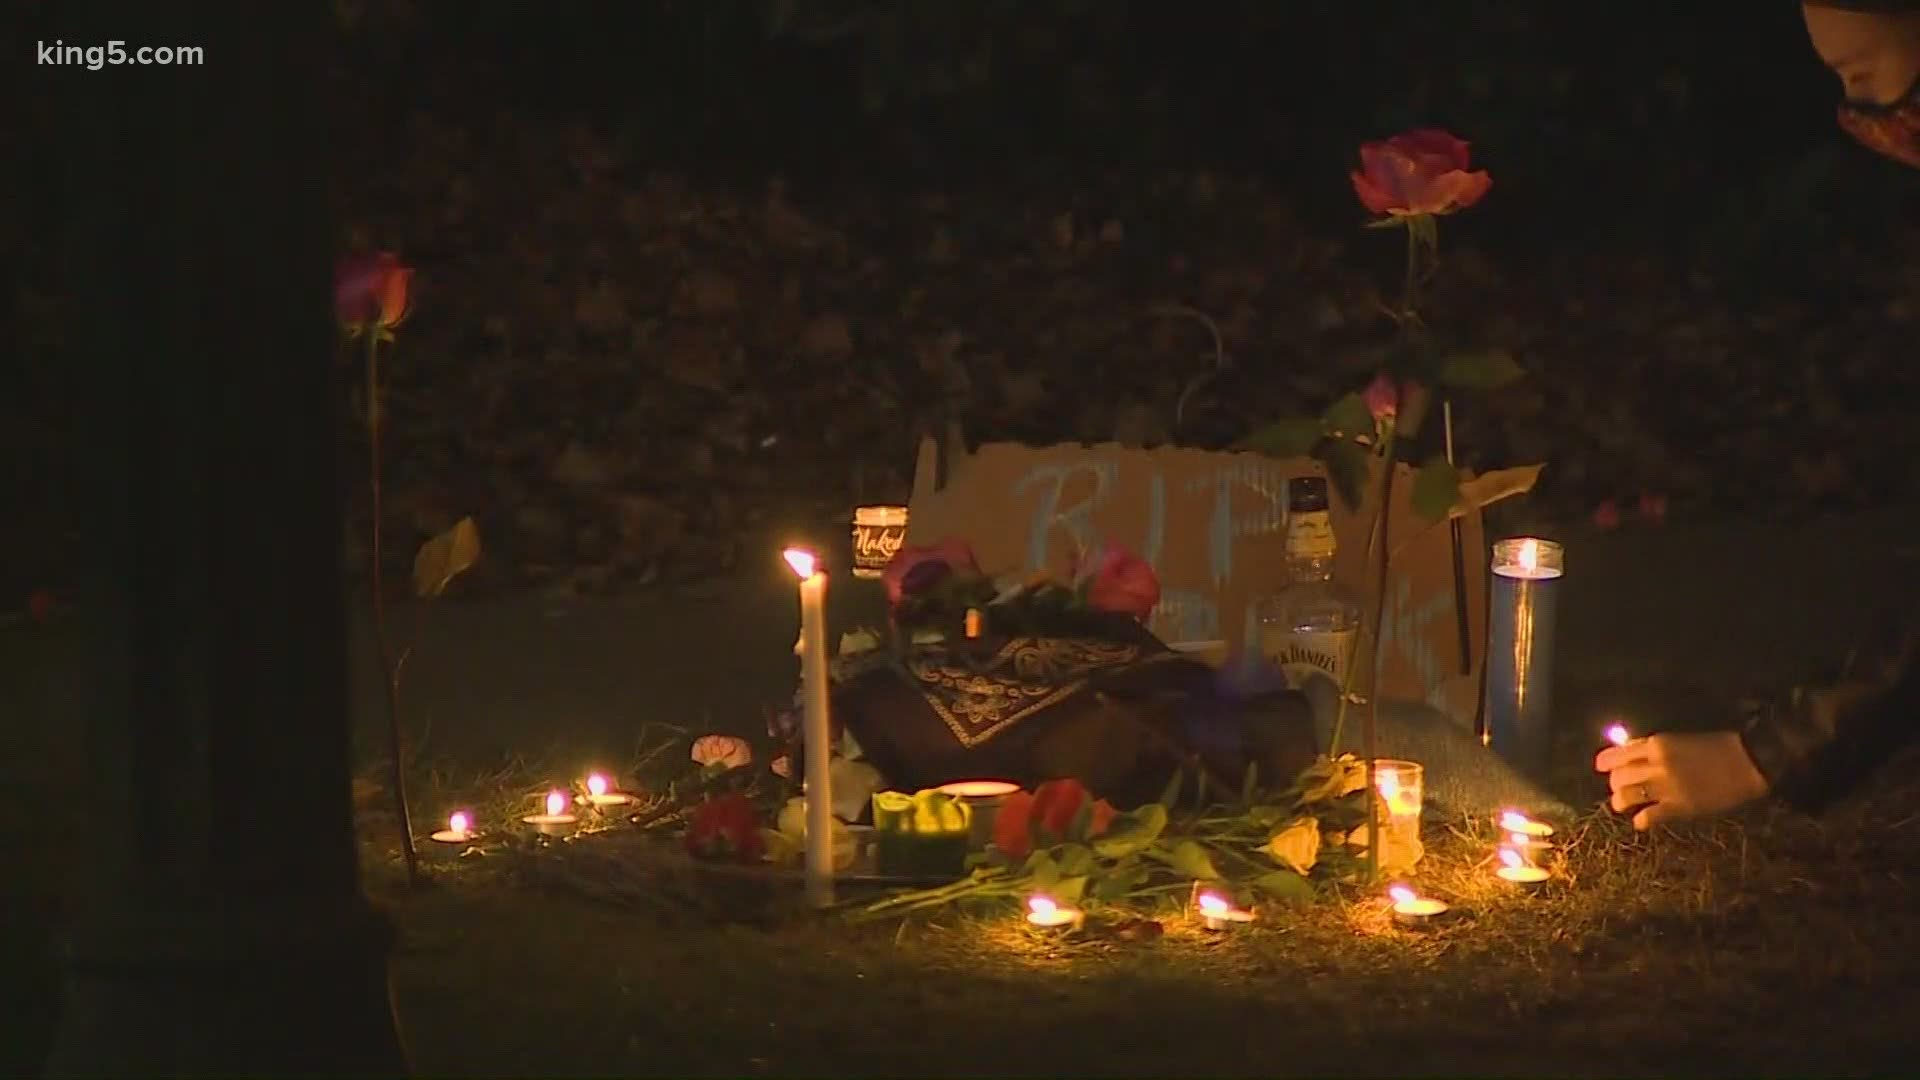 Advocacy groups called the fatal shooting "a hate crime against the unhoused." Tacoma police have not released information on the suspect or a possible motive.